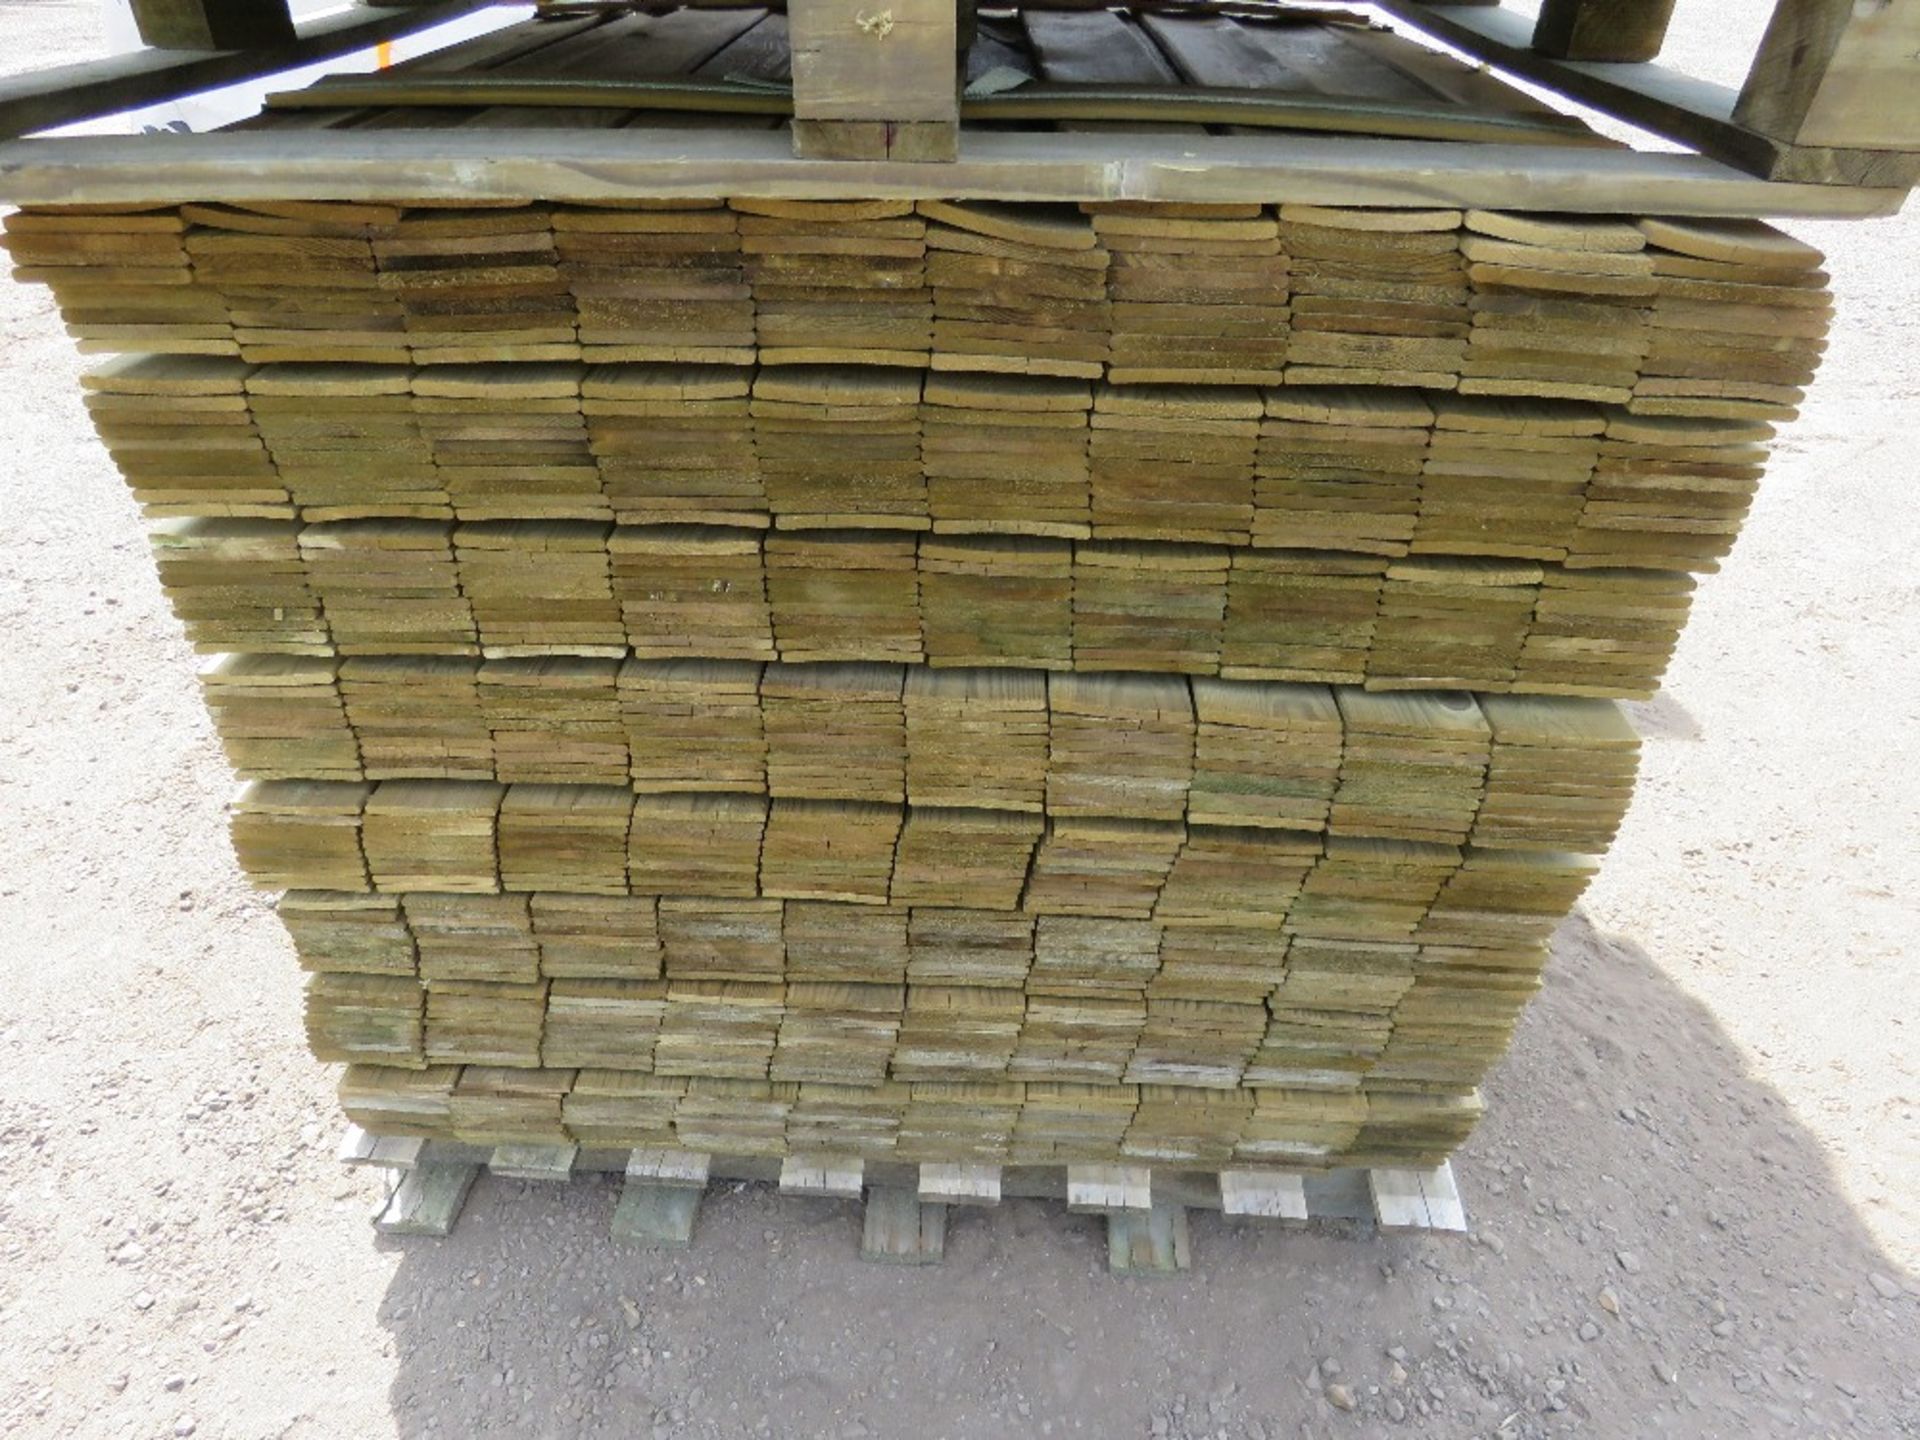 2 X PALLETS OF HIT AND MISS FENCE CLADDING TIMBER 0.83M - 1.12M APPROX X 100MM APPROX. - Image 4 of 15